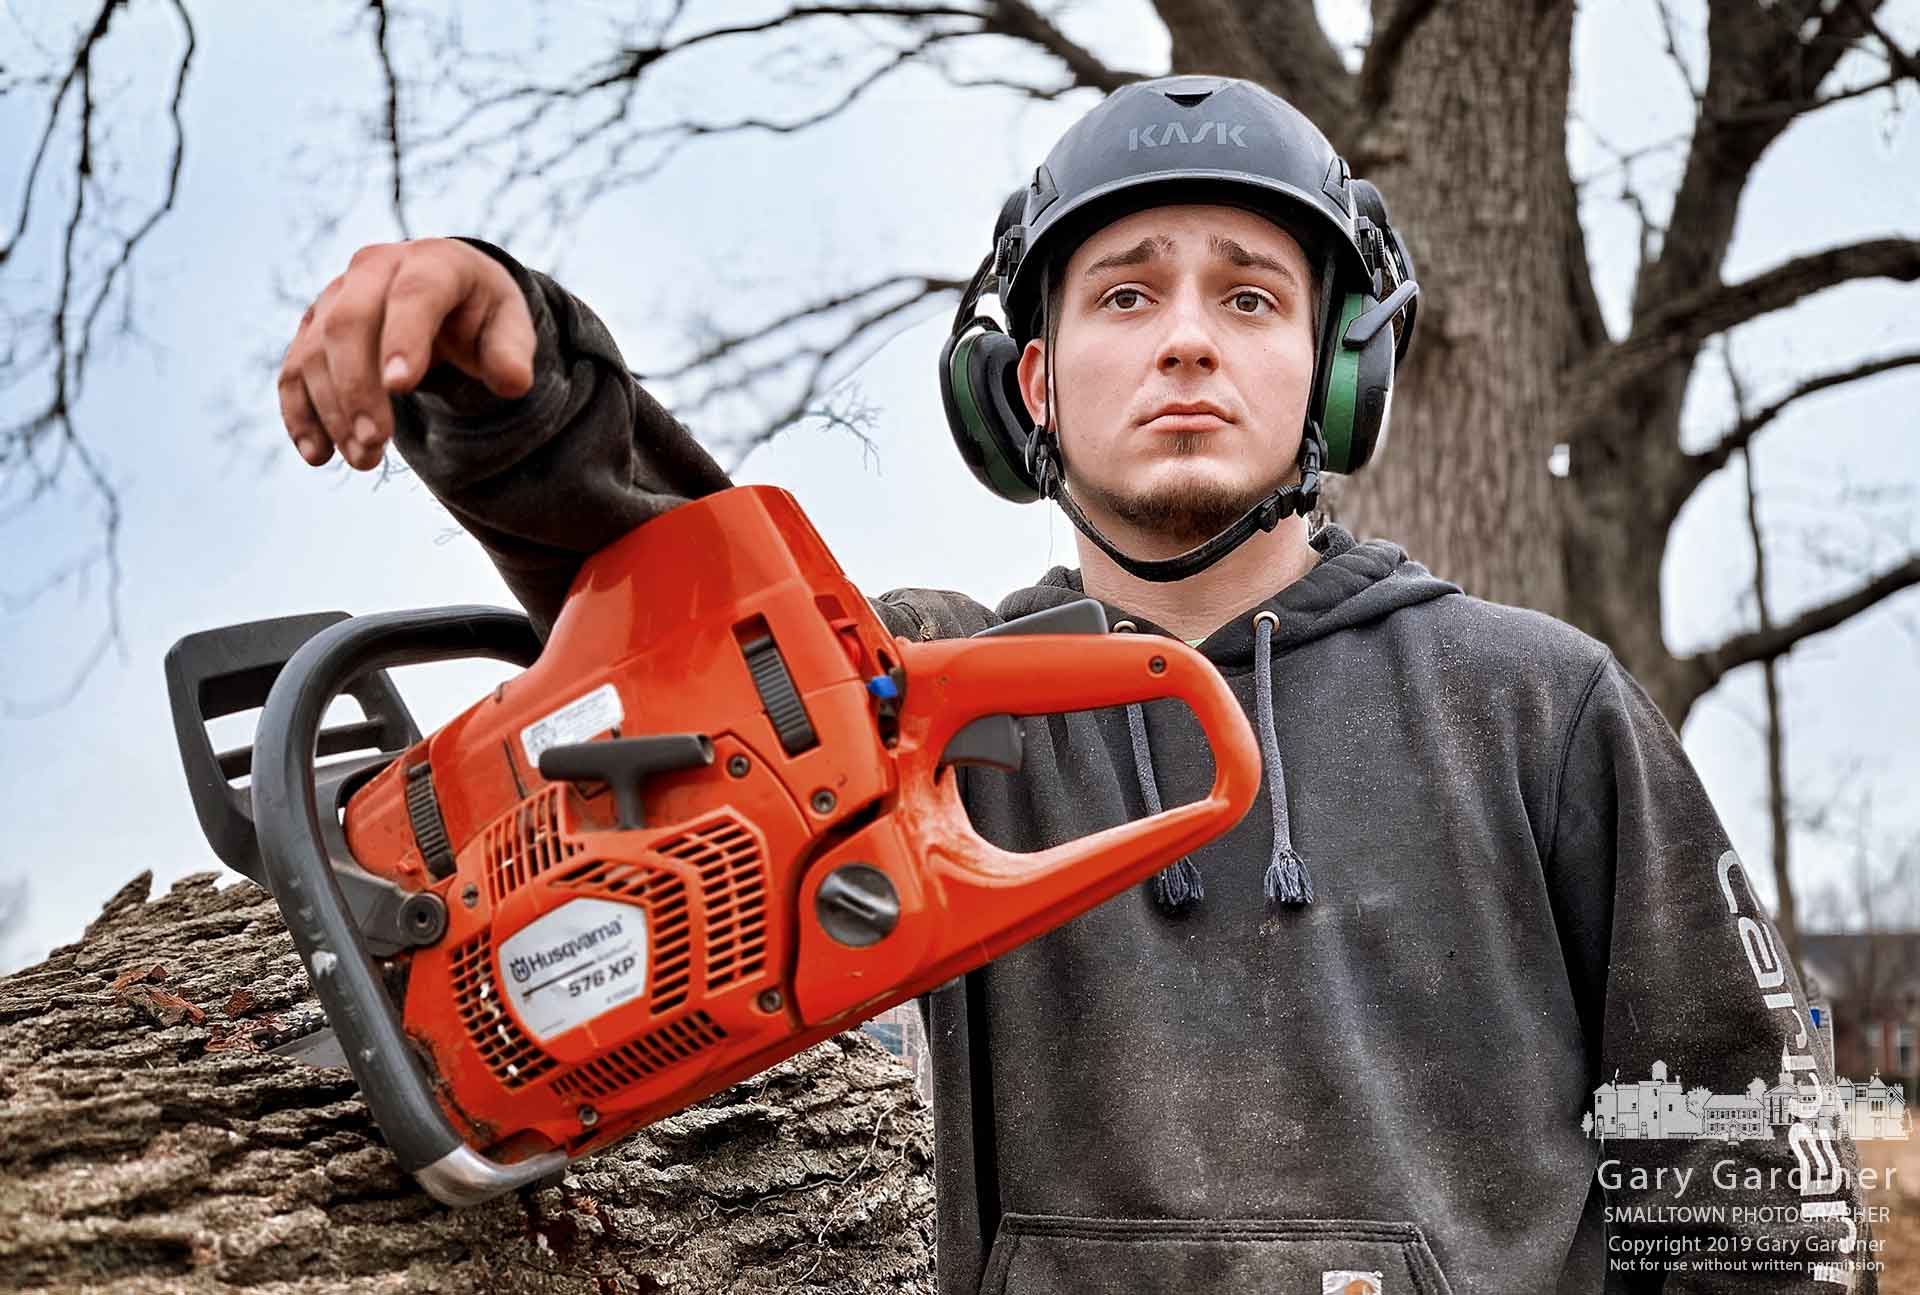 Jake Borne waits for the rest of his crew to clear away felled trees before continuing to cut trees on property being prepared for development at Polaris Parkway and Meridian Way. My Final Photo for March 2, 2019.